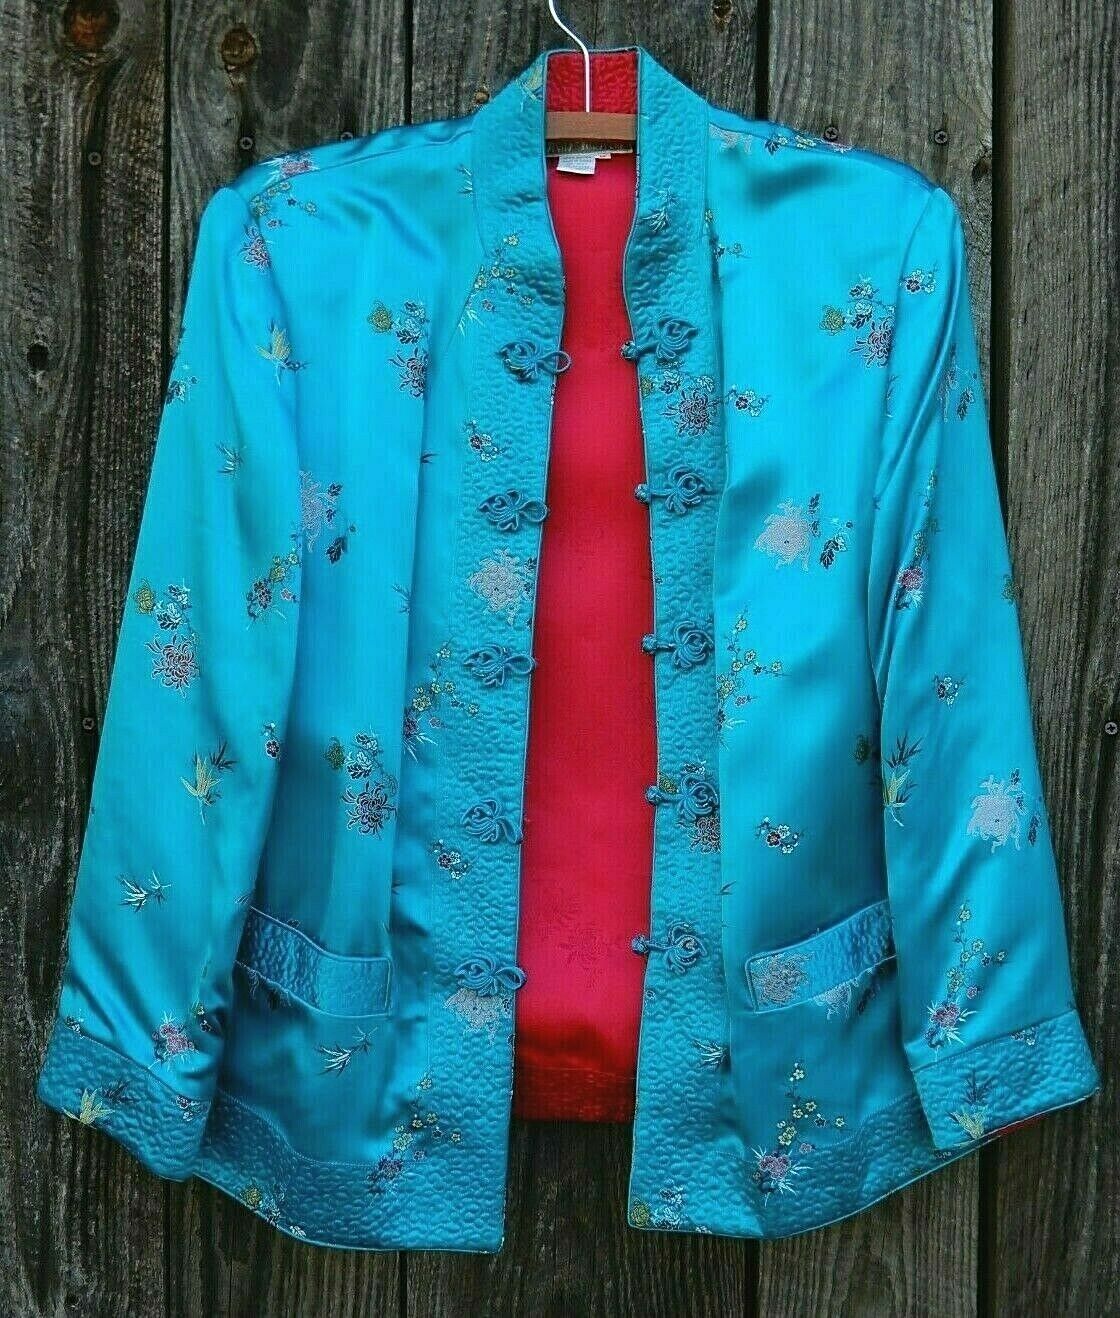 Vintage SIGHS & WHISPERS Asian Jacket Womens Size M Turquoise/Magenta Reversible